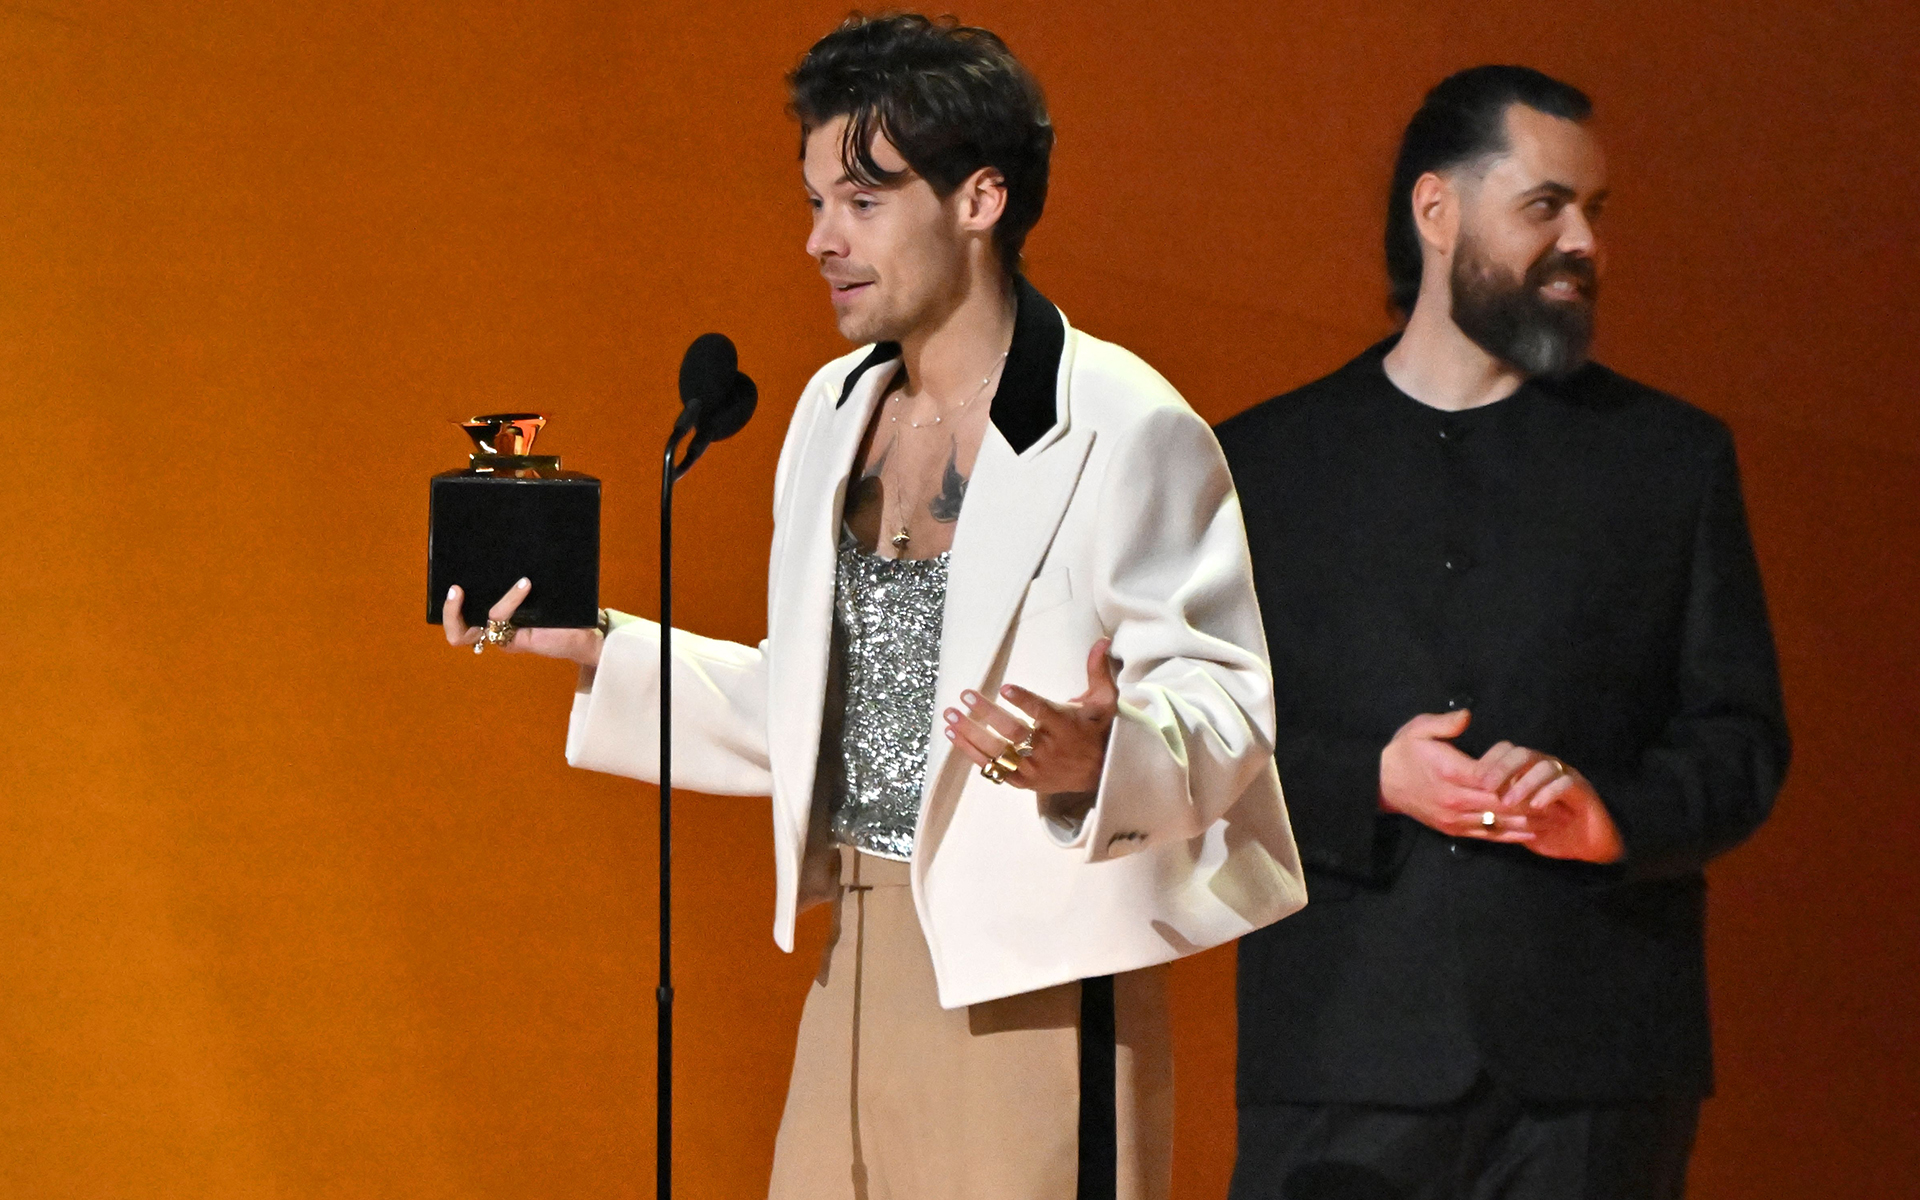 Harry Styles collects the award for Album of the Year at the Grammys 2023. Photo by Rob Latour/ Shutterstock